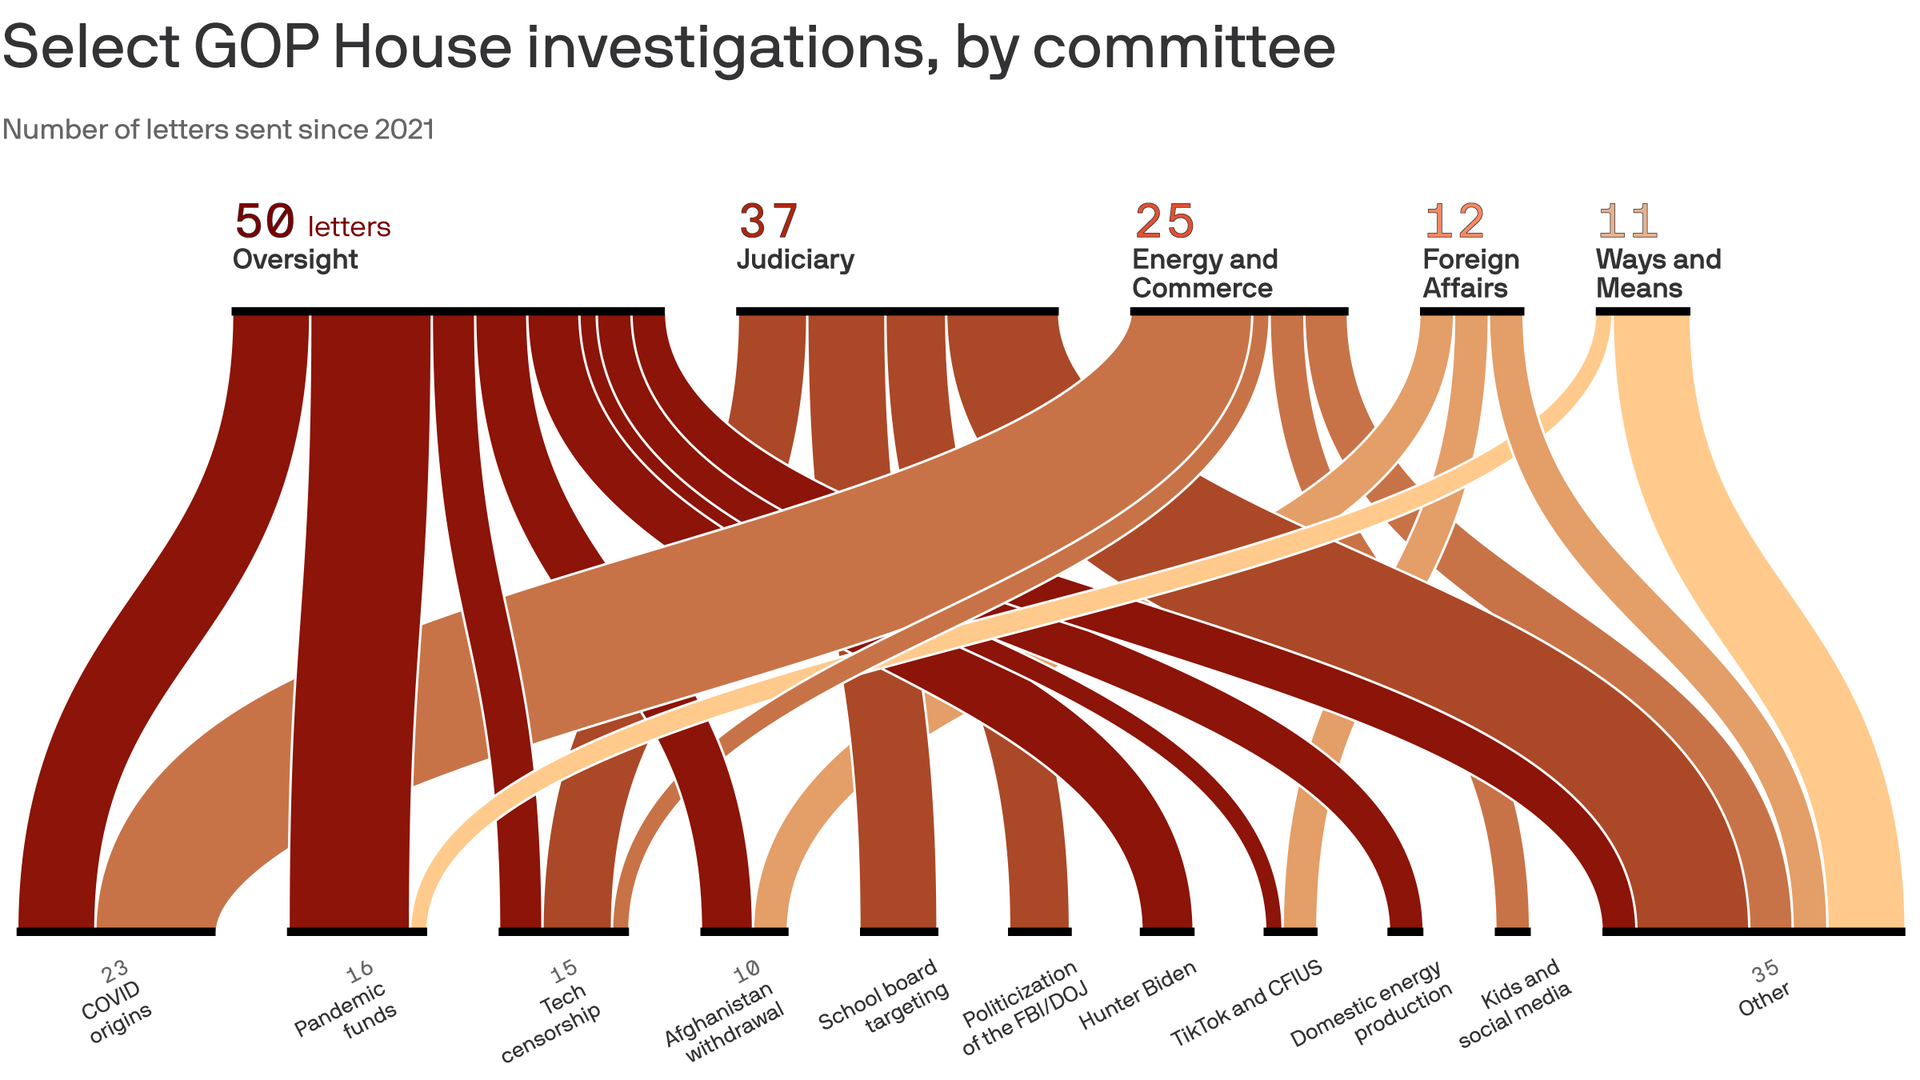 Select GOP House invesigations, by committee